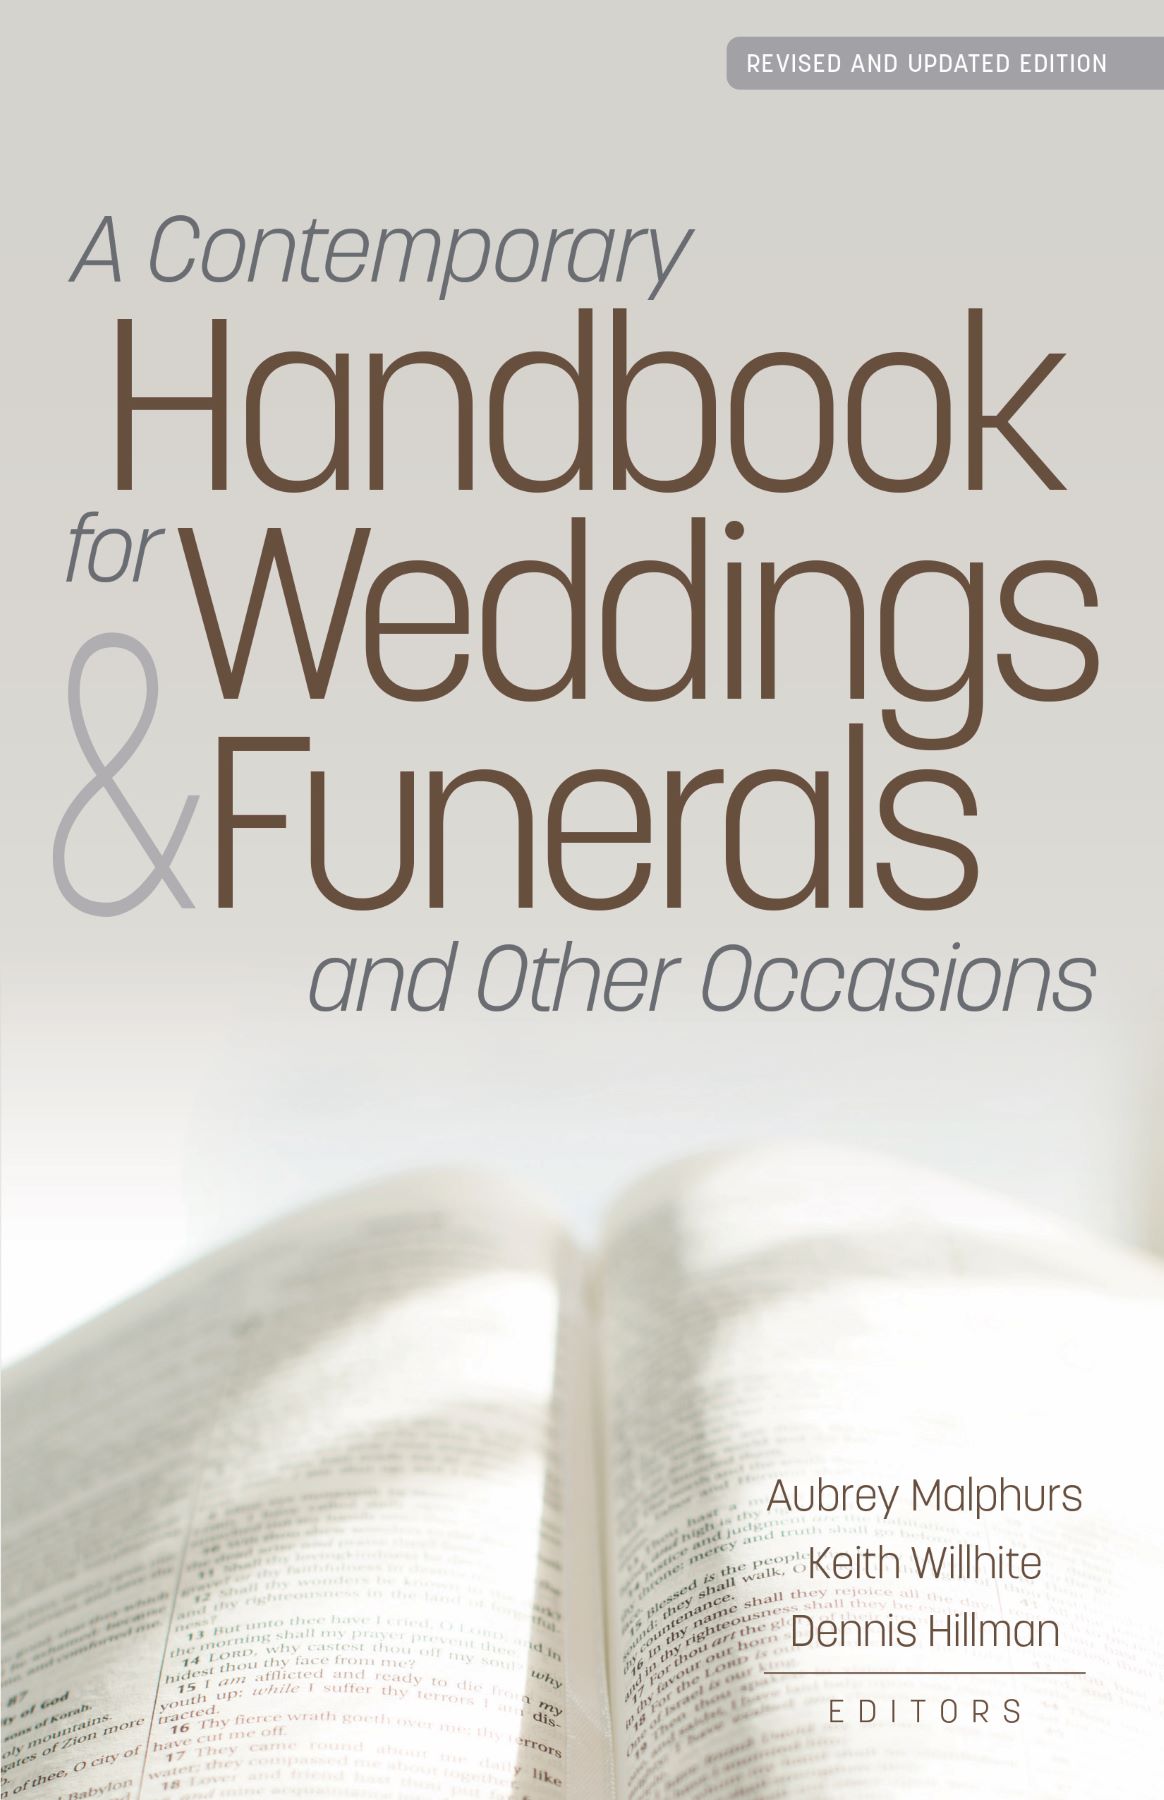 A Contemporary Handbook for Weddings & Funerals and Other Occasions